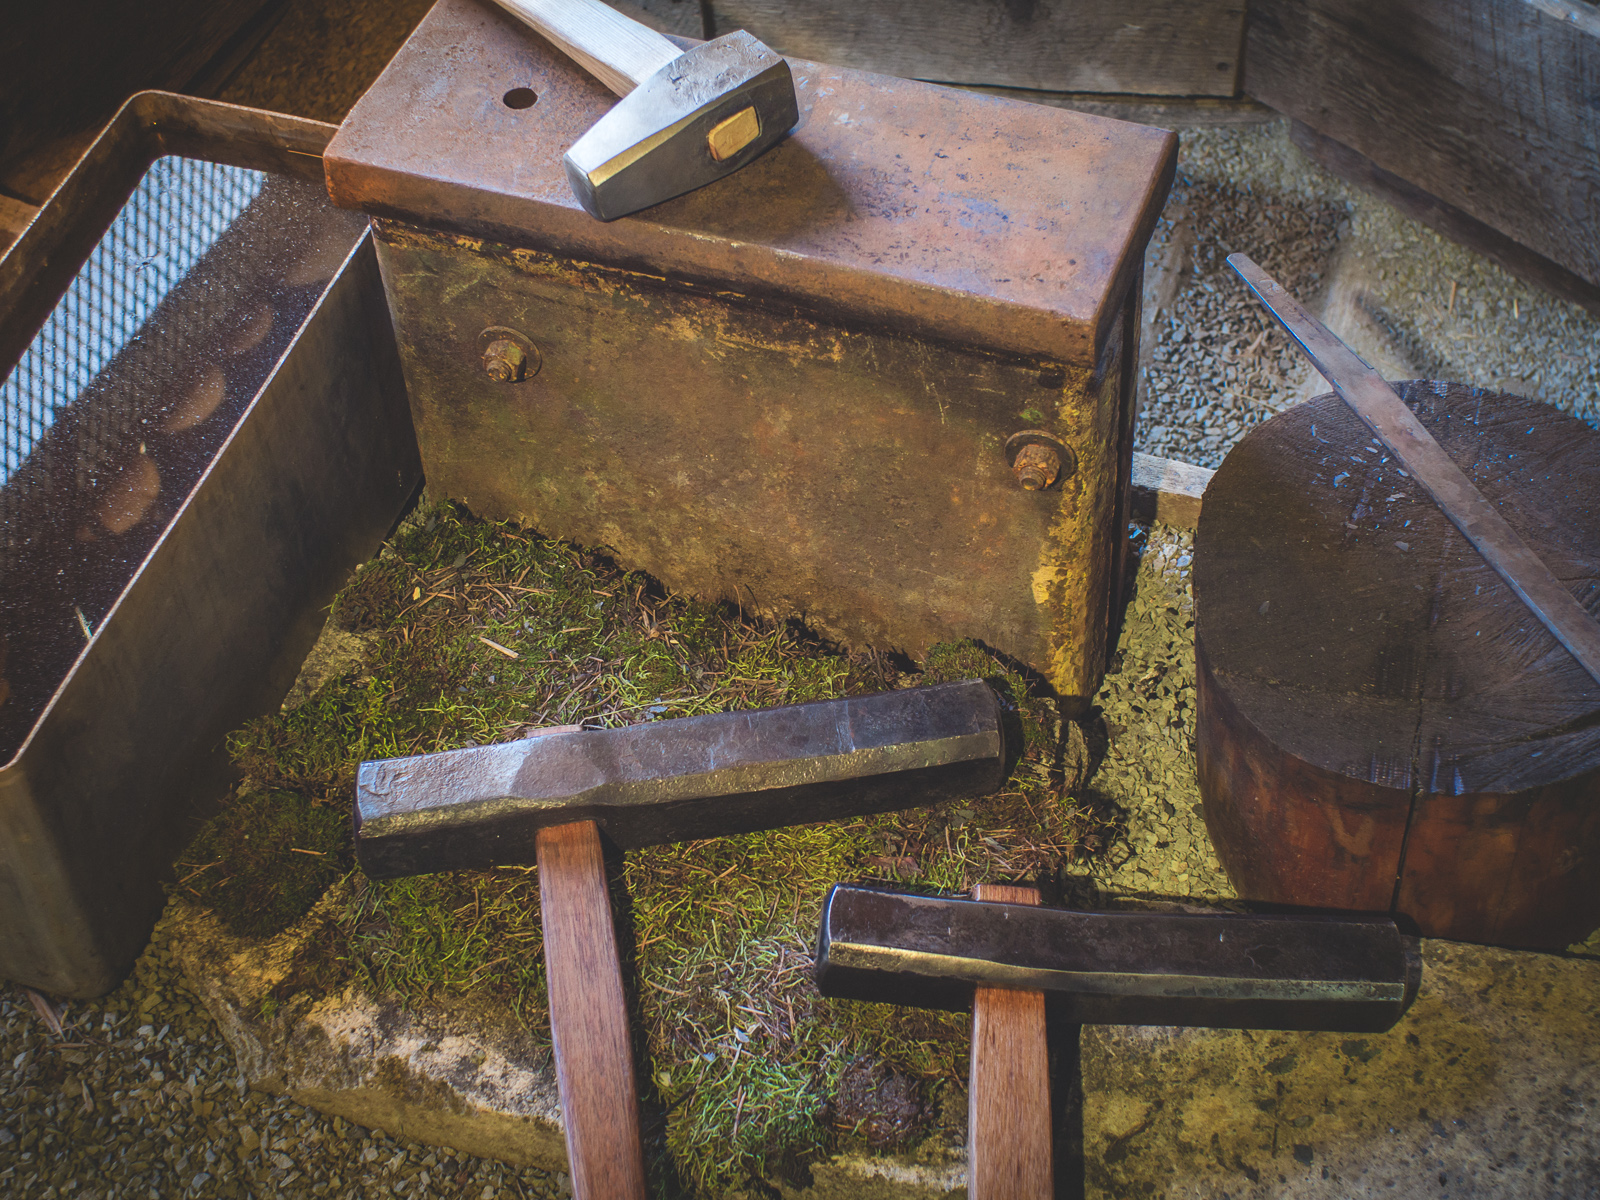 Island Blacksmith: Traditionally crafted knives from reclaimed steel.